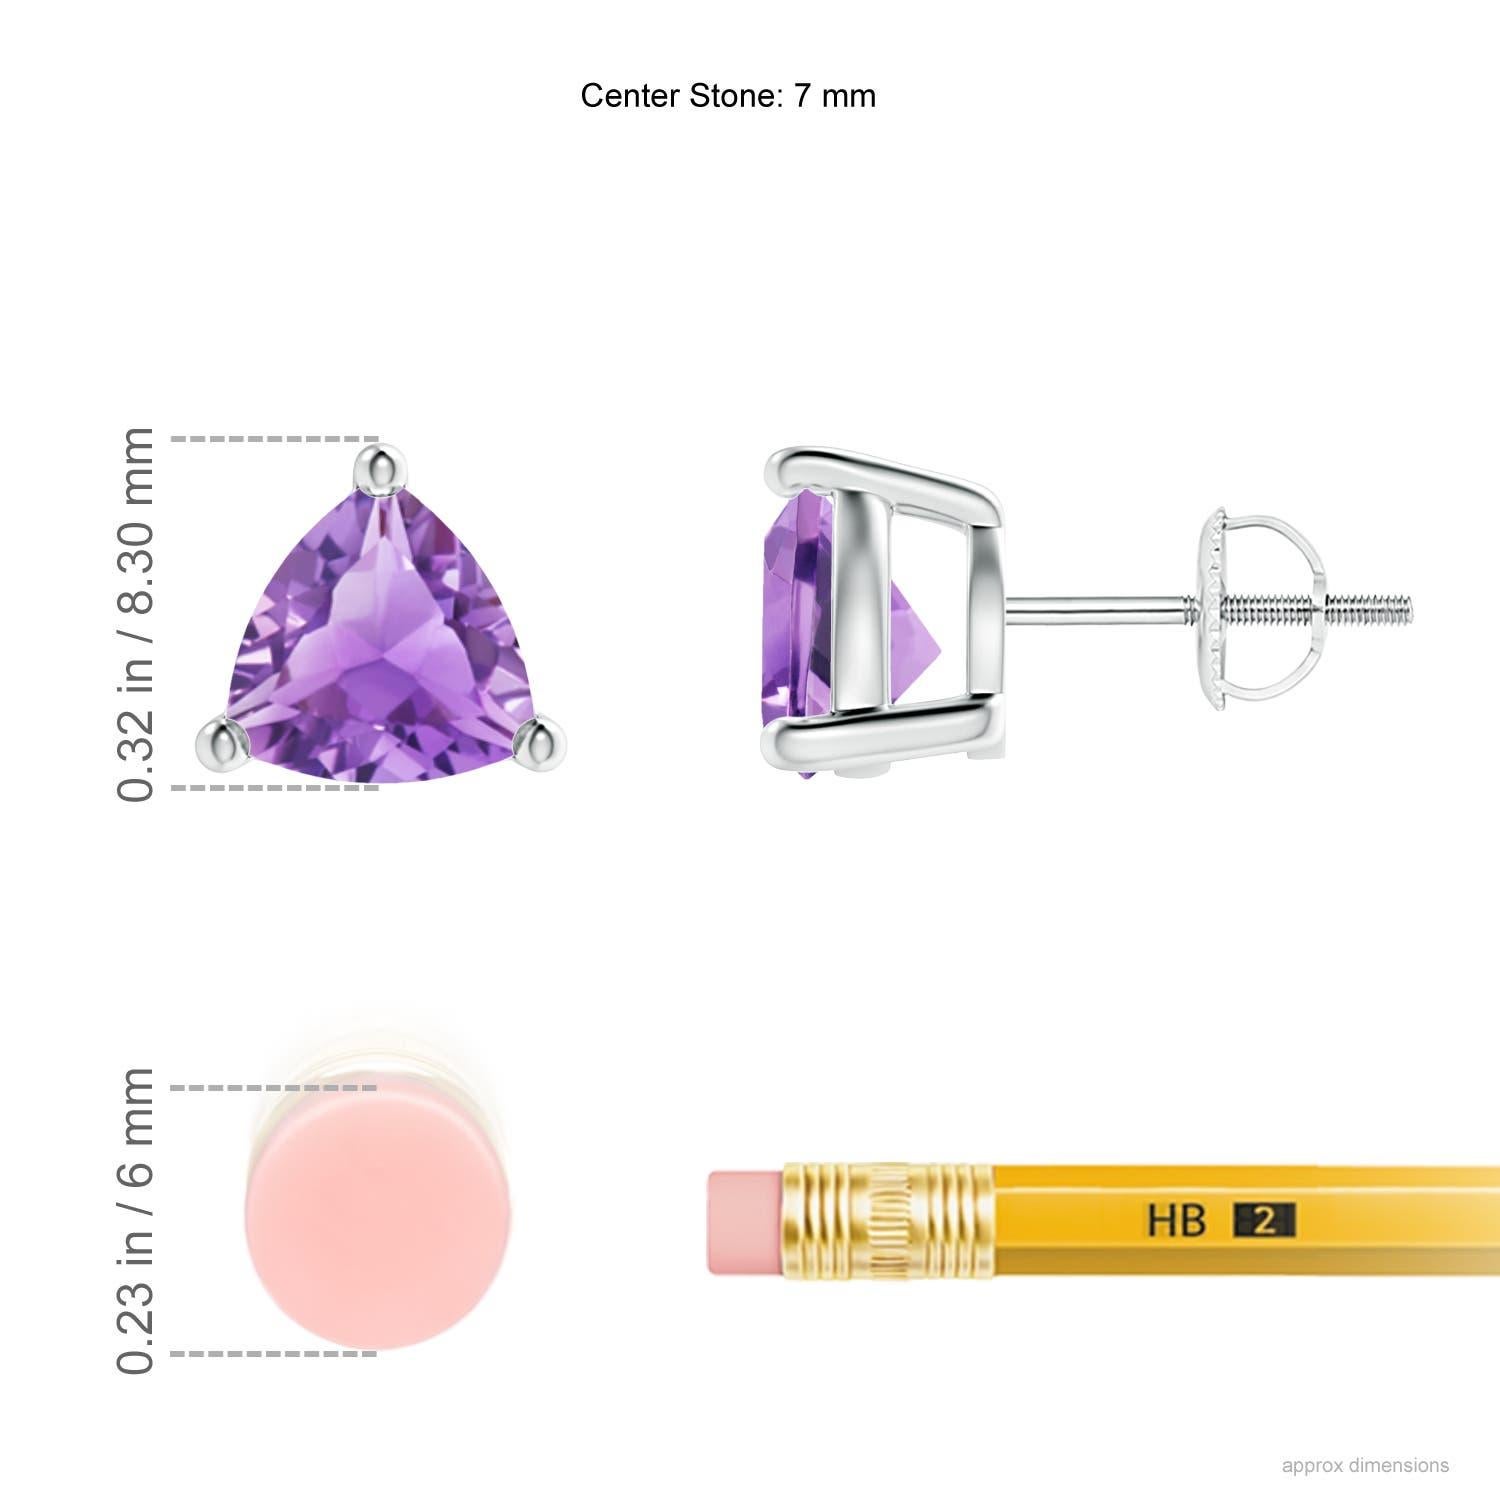 Displaying the royal purple amethysts in a prong setting, these solitaire stud earrings are a pair of enviable beauty. The gemstones are cut in a striking trillion shape and mounted in platinum.